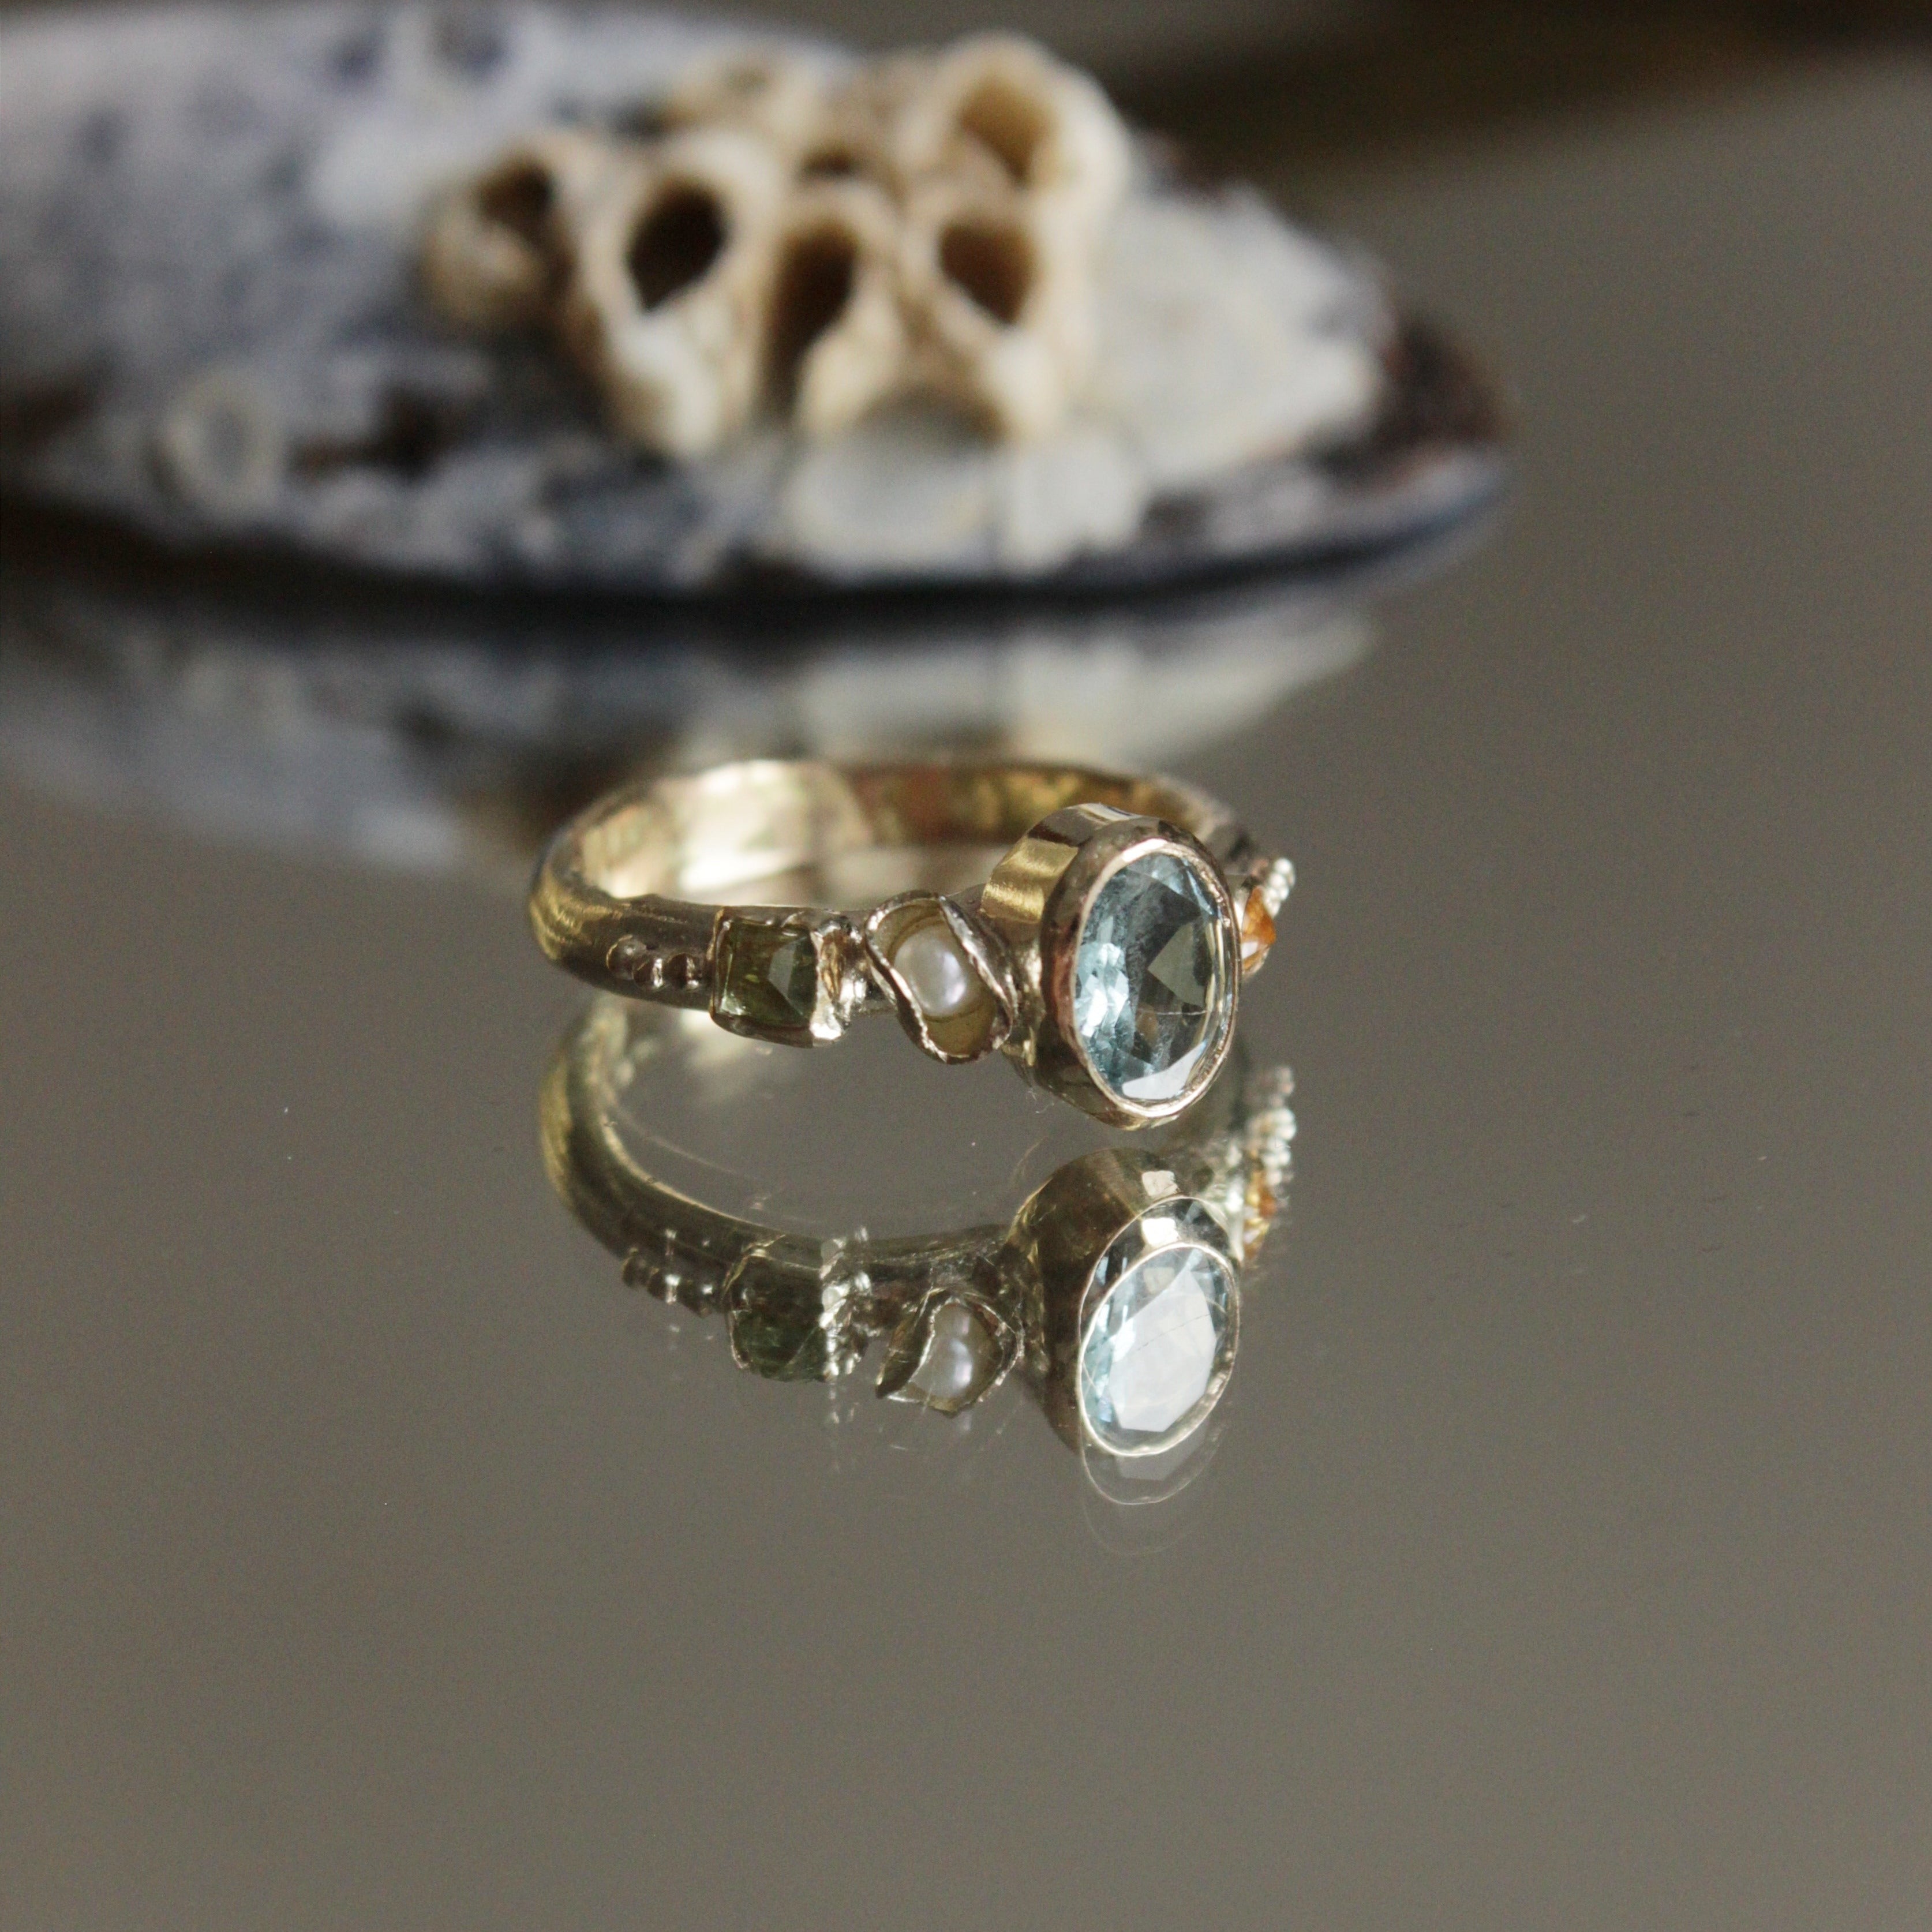 Bespoke, hand crafted 9ct gold alternative engagement ring. The ring features a vibrant oval Aquamarine, a pearl and sapphires. Handcrafted in Frome by Josie Mitchell Jewellery for the alternative bride and ocean lover.